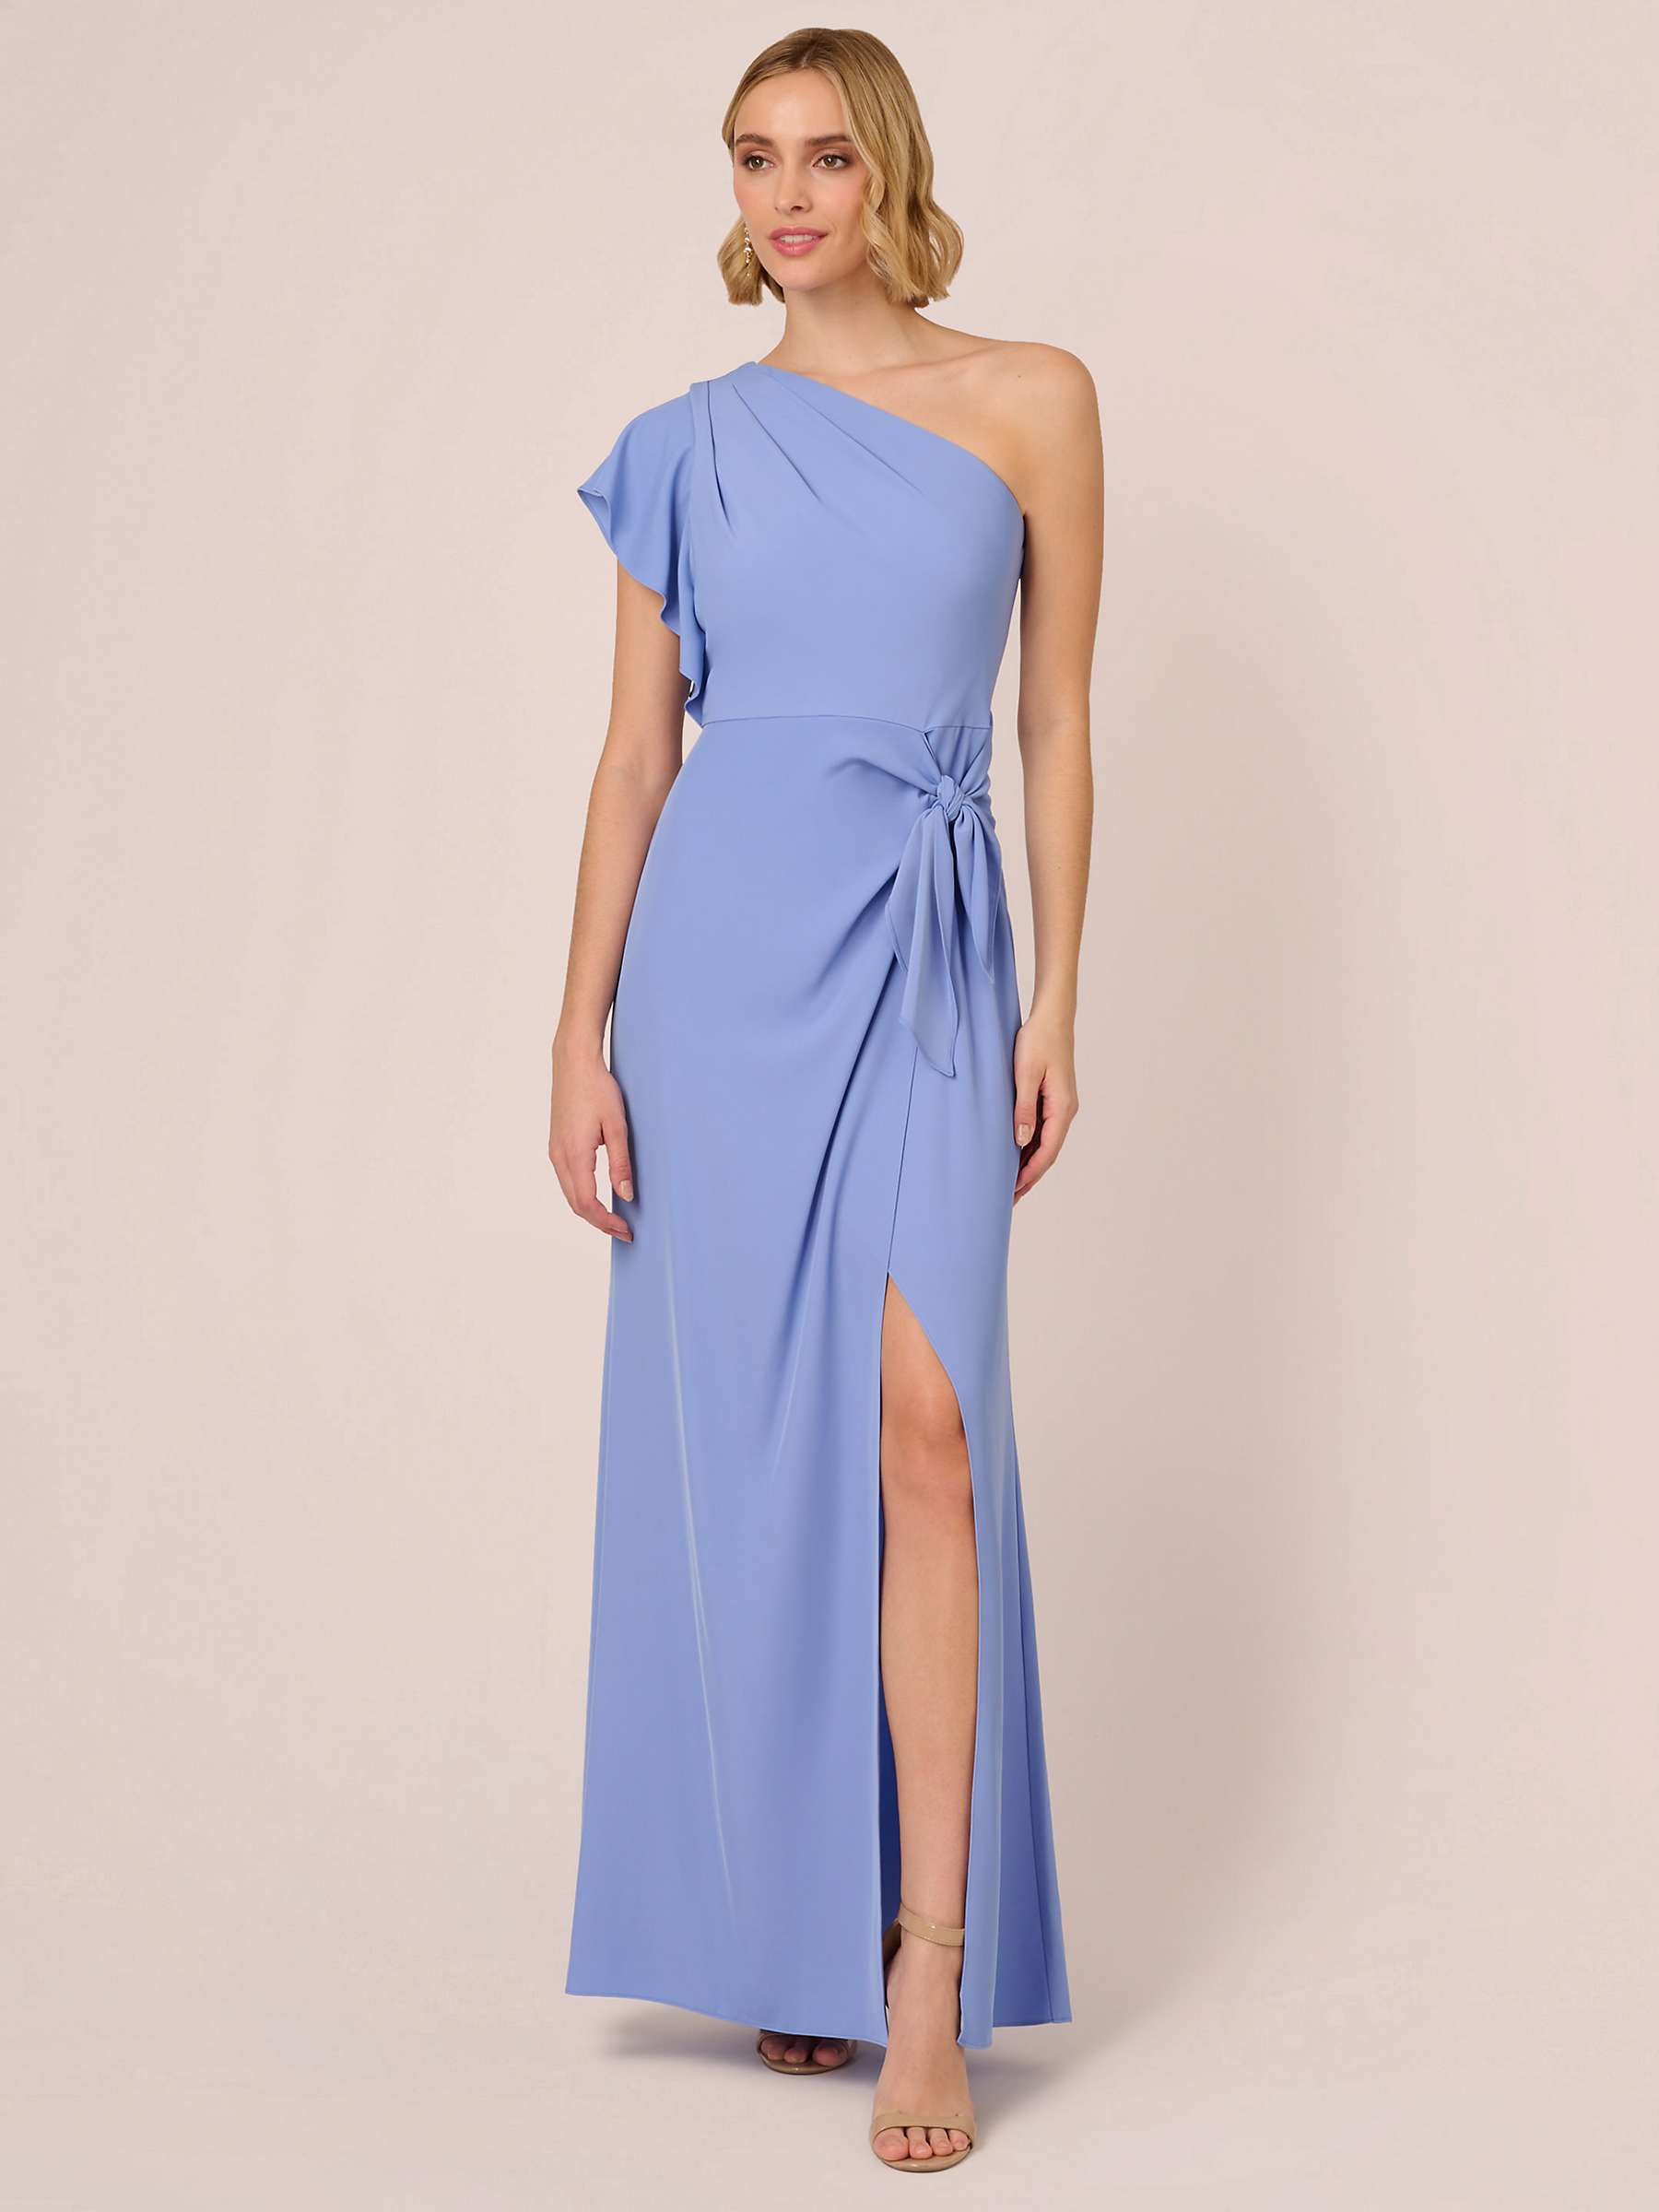 Buy Adrianna Papell One Shoulder Maxi Dress, Peri Cruise Online at johnlewis.com